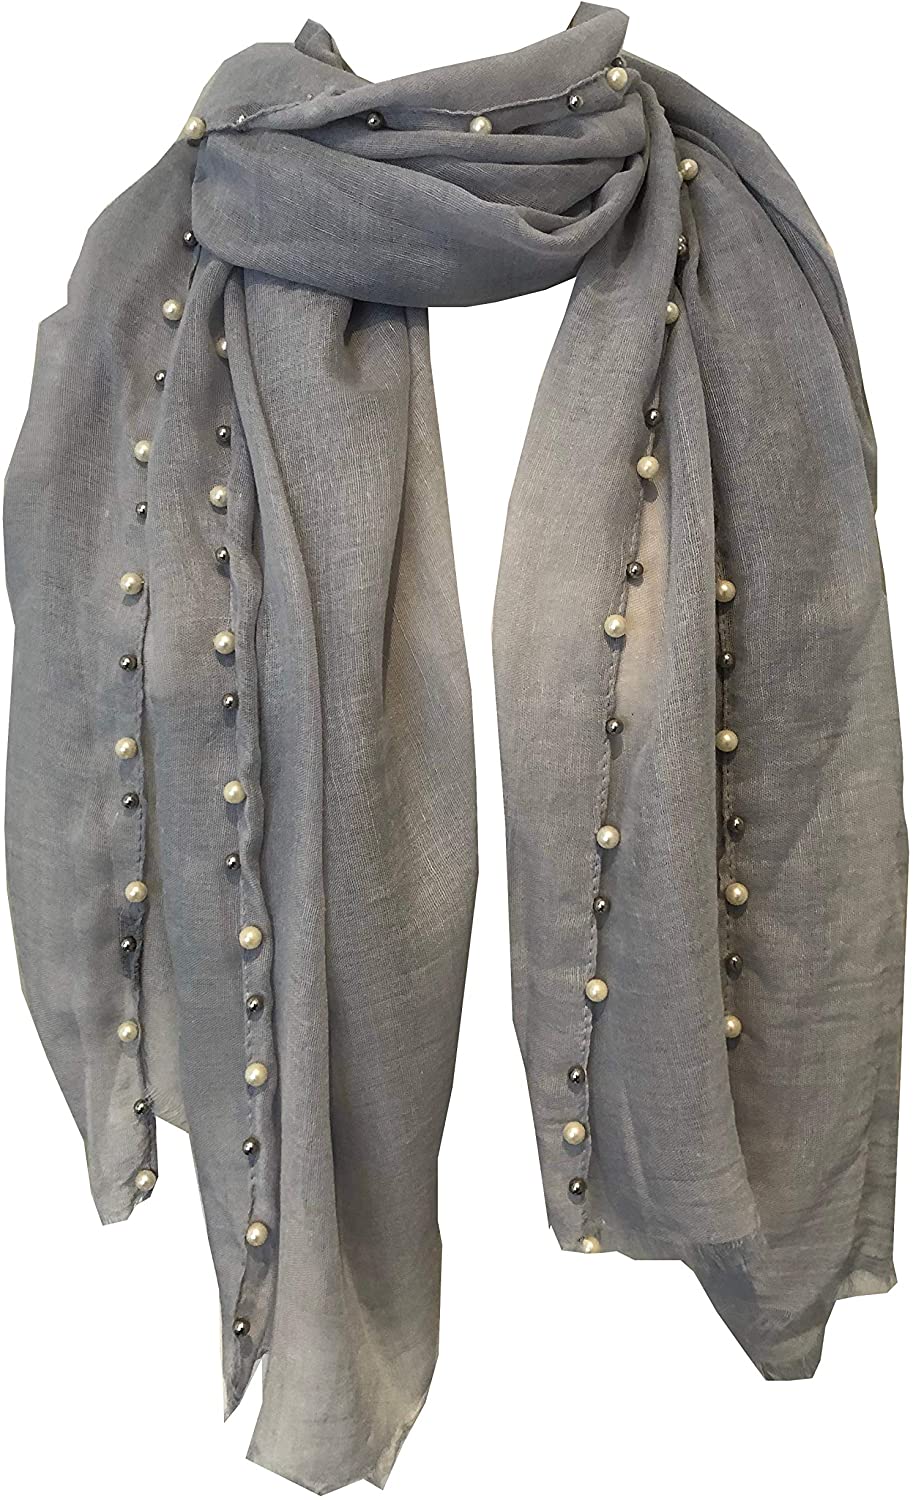 Pamper Yourself Now Grey with Beads and Pearls with Frayed Edge Long Soft Scarf/wrap